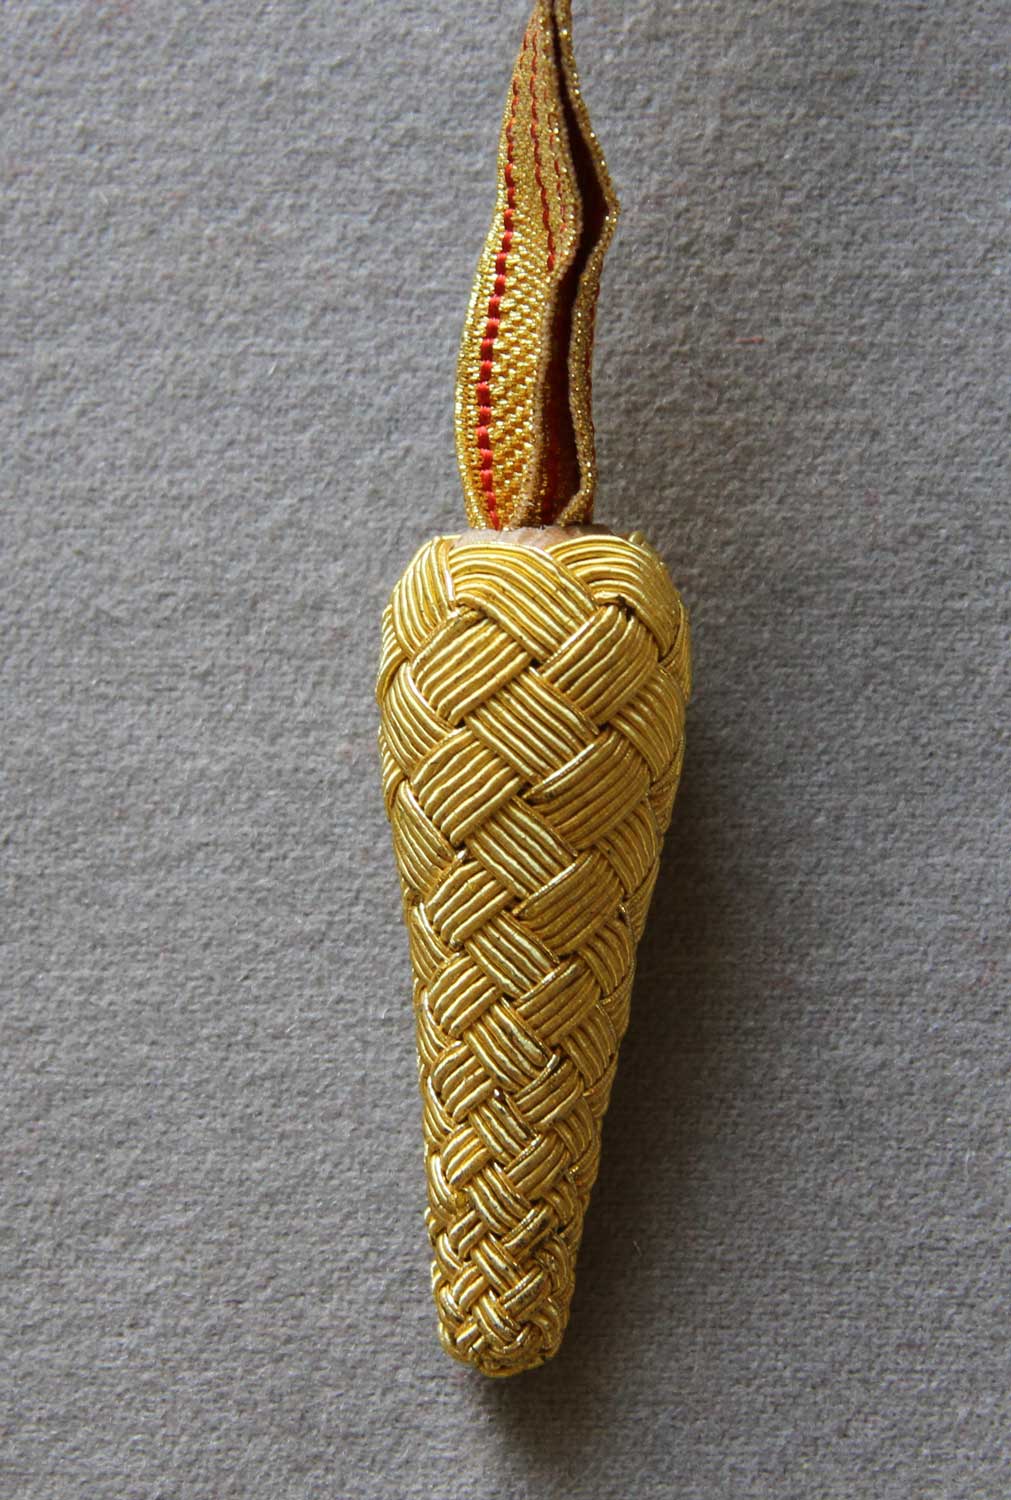 British Infantry Officer's Sword Knot (1857 to present)